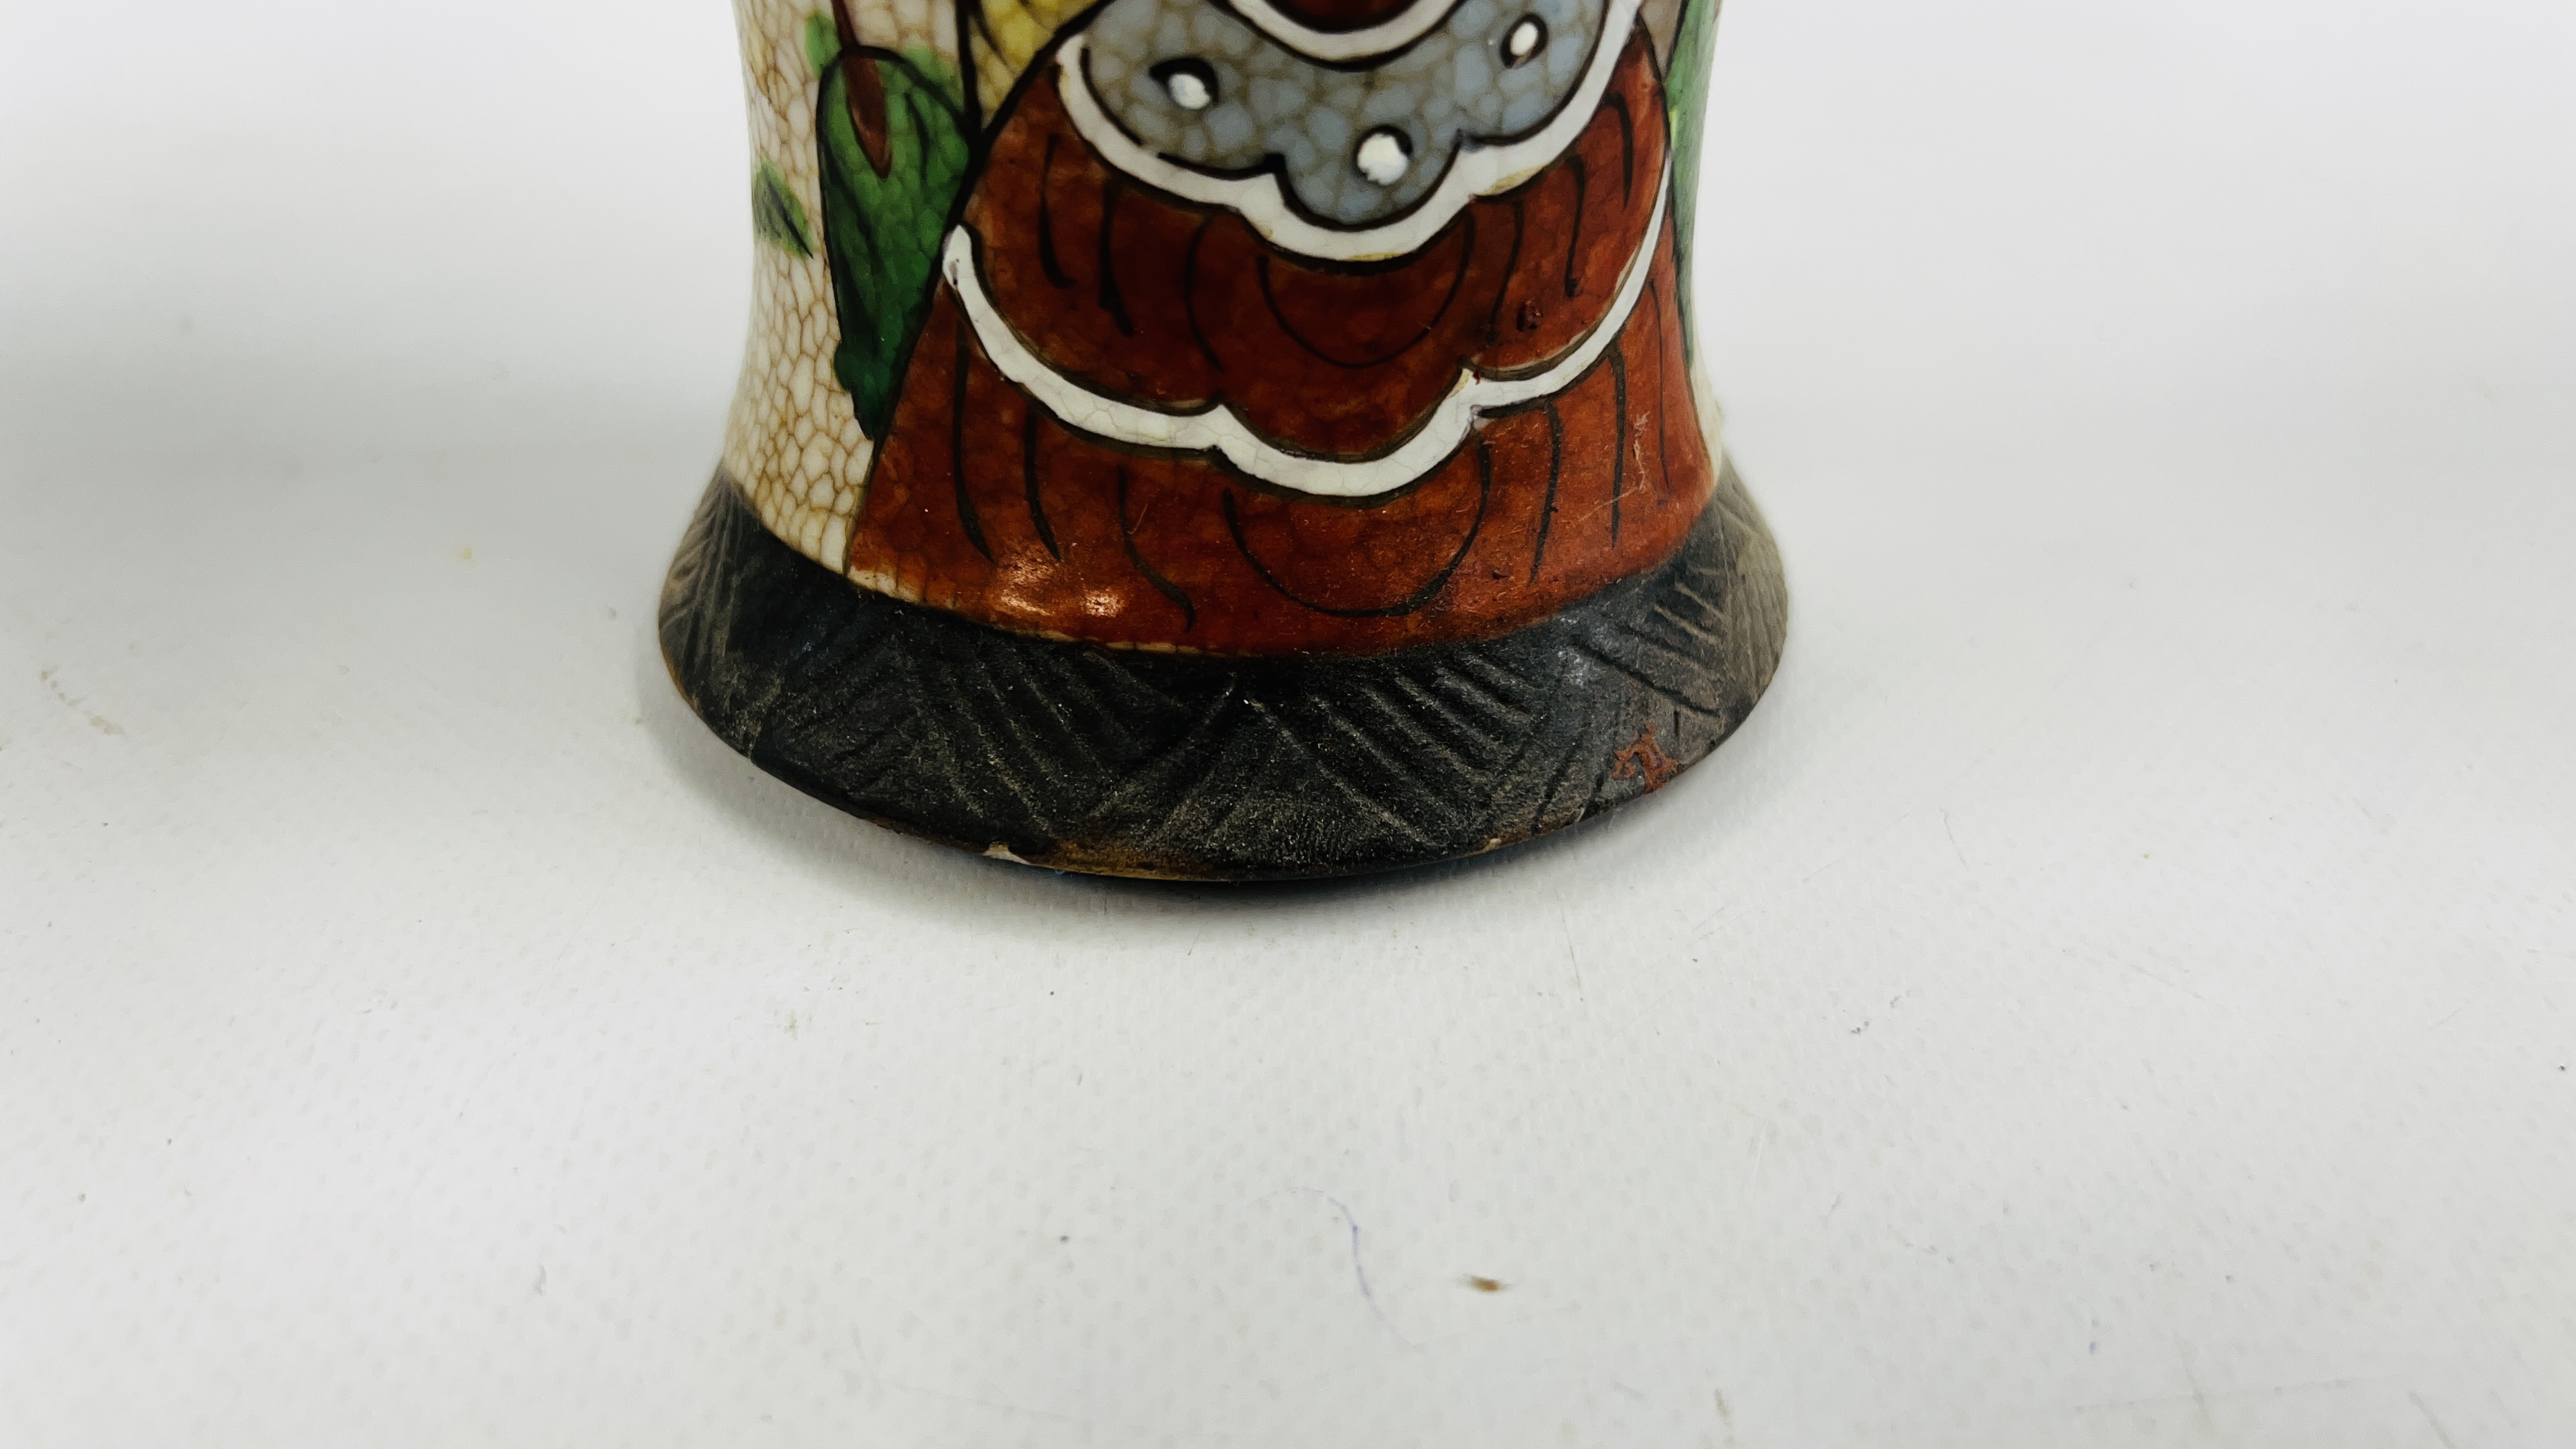 A CHINESE NANJING STYLE CRACKLED GLAZED VASE DECORATED WITH CHARACTERS AND WARRIORS UPON HORSEBACK - Image 5 of 7